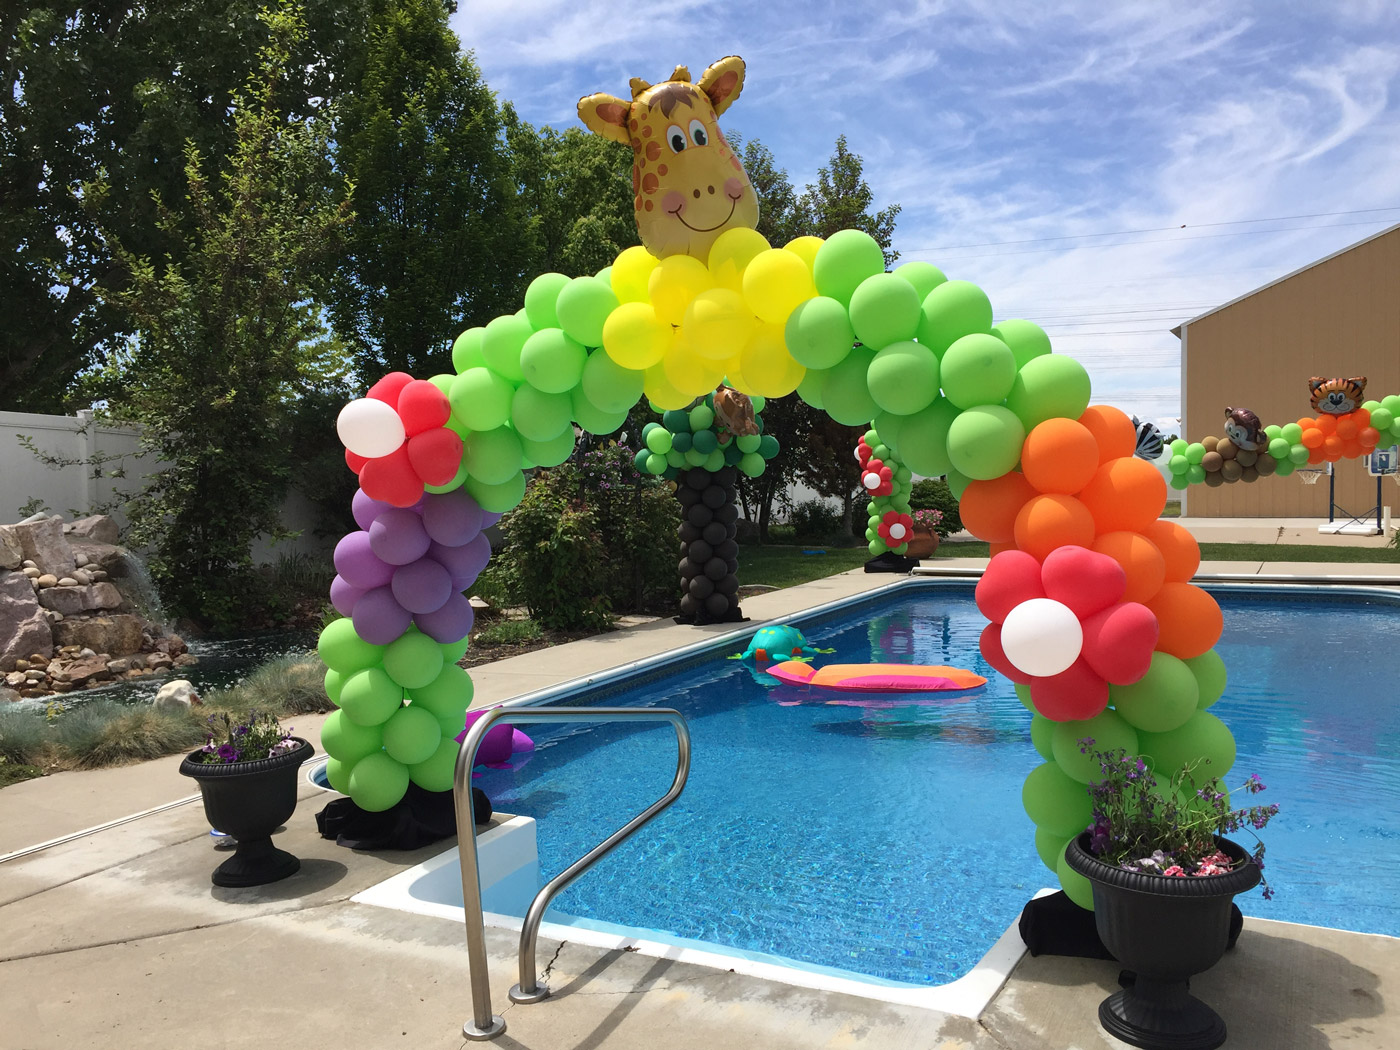 This is a giraffe balloon arch made by an event decorator in Salt Lake City Utah